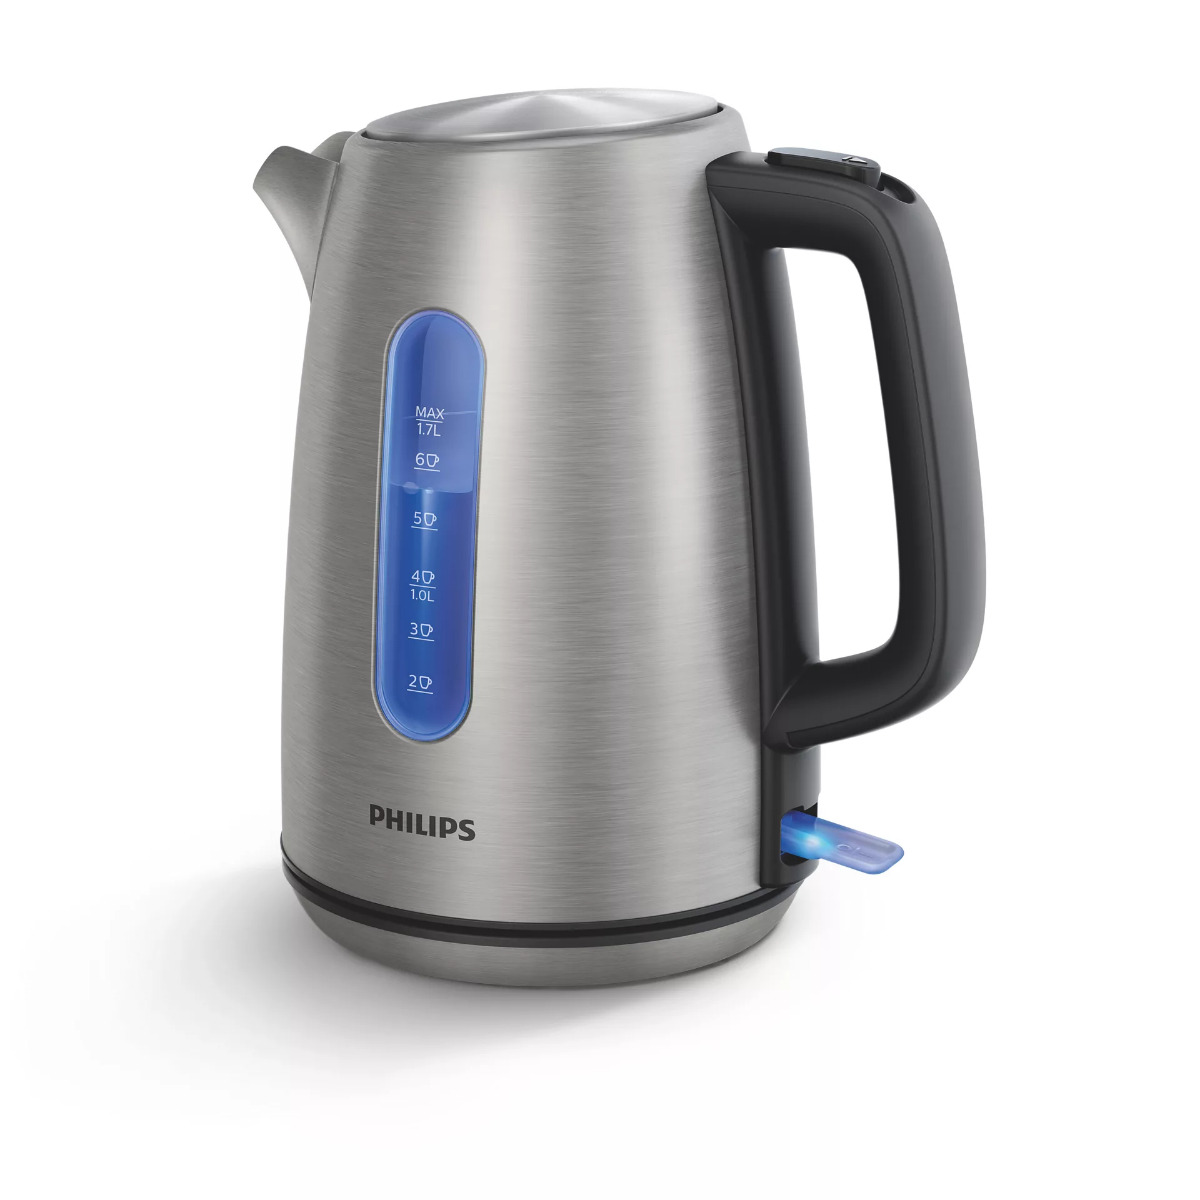 Philips Electric Kettle 1.7 Litre - Stainless Steel,HD9357/12